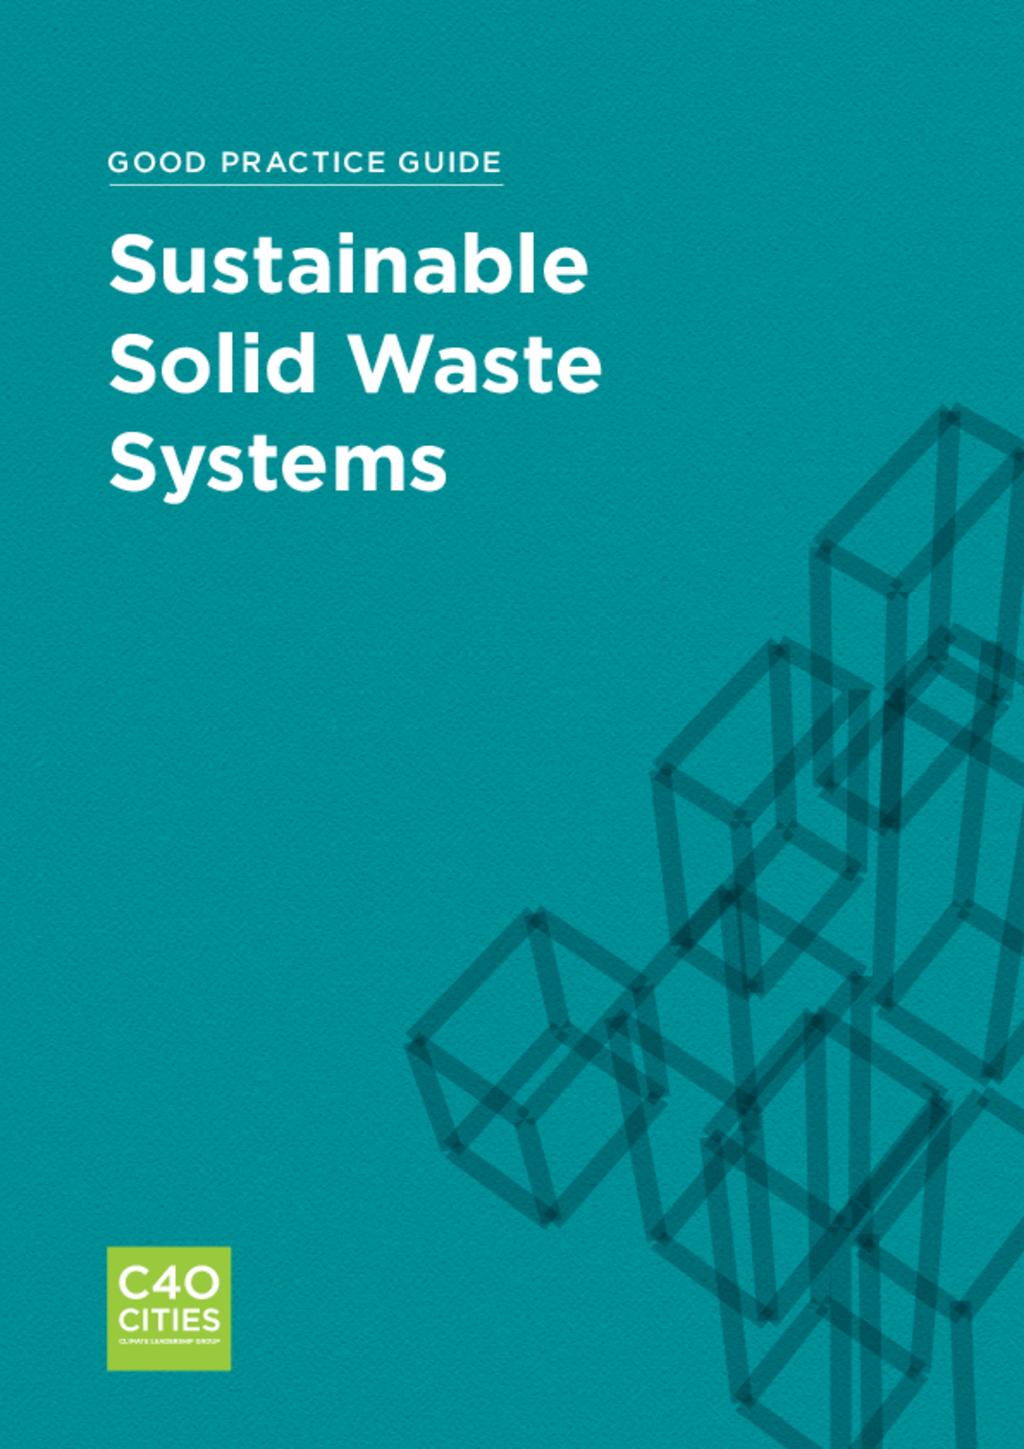 C40 Sustainable Solid Waste Systems